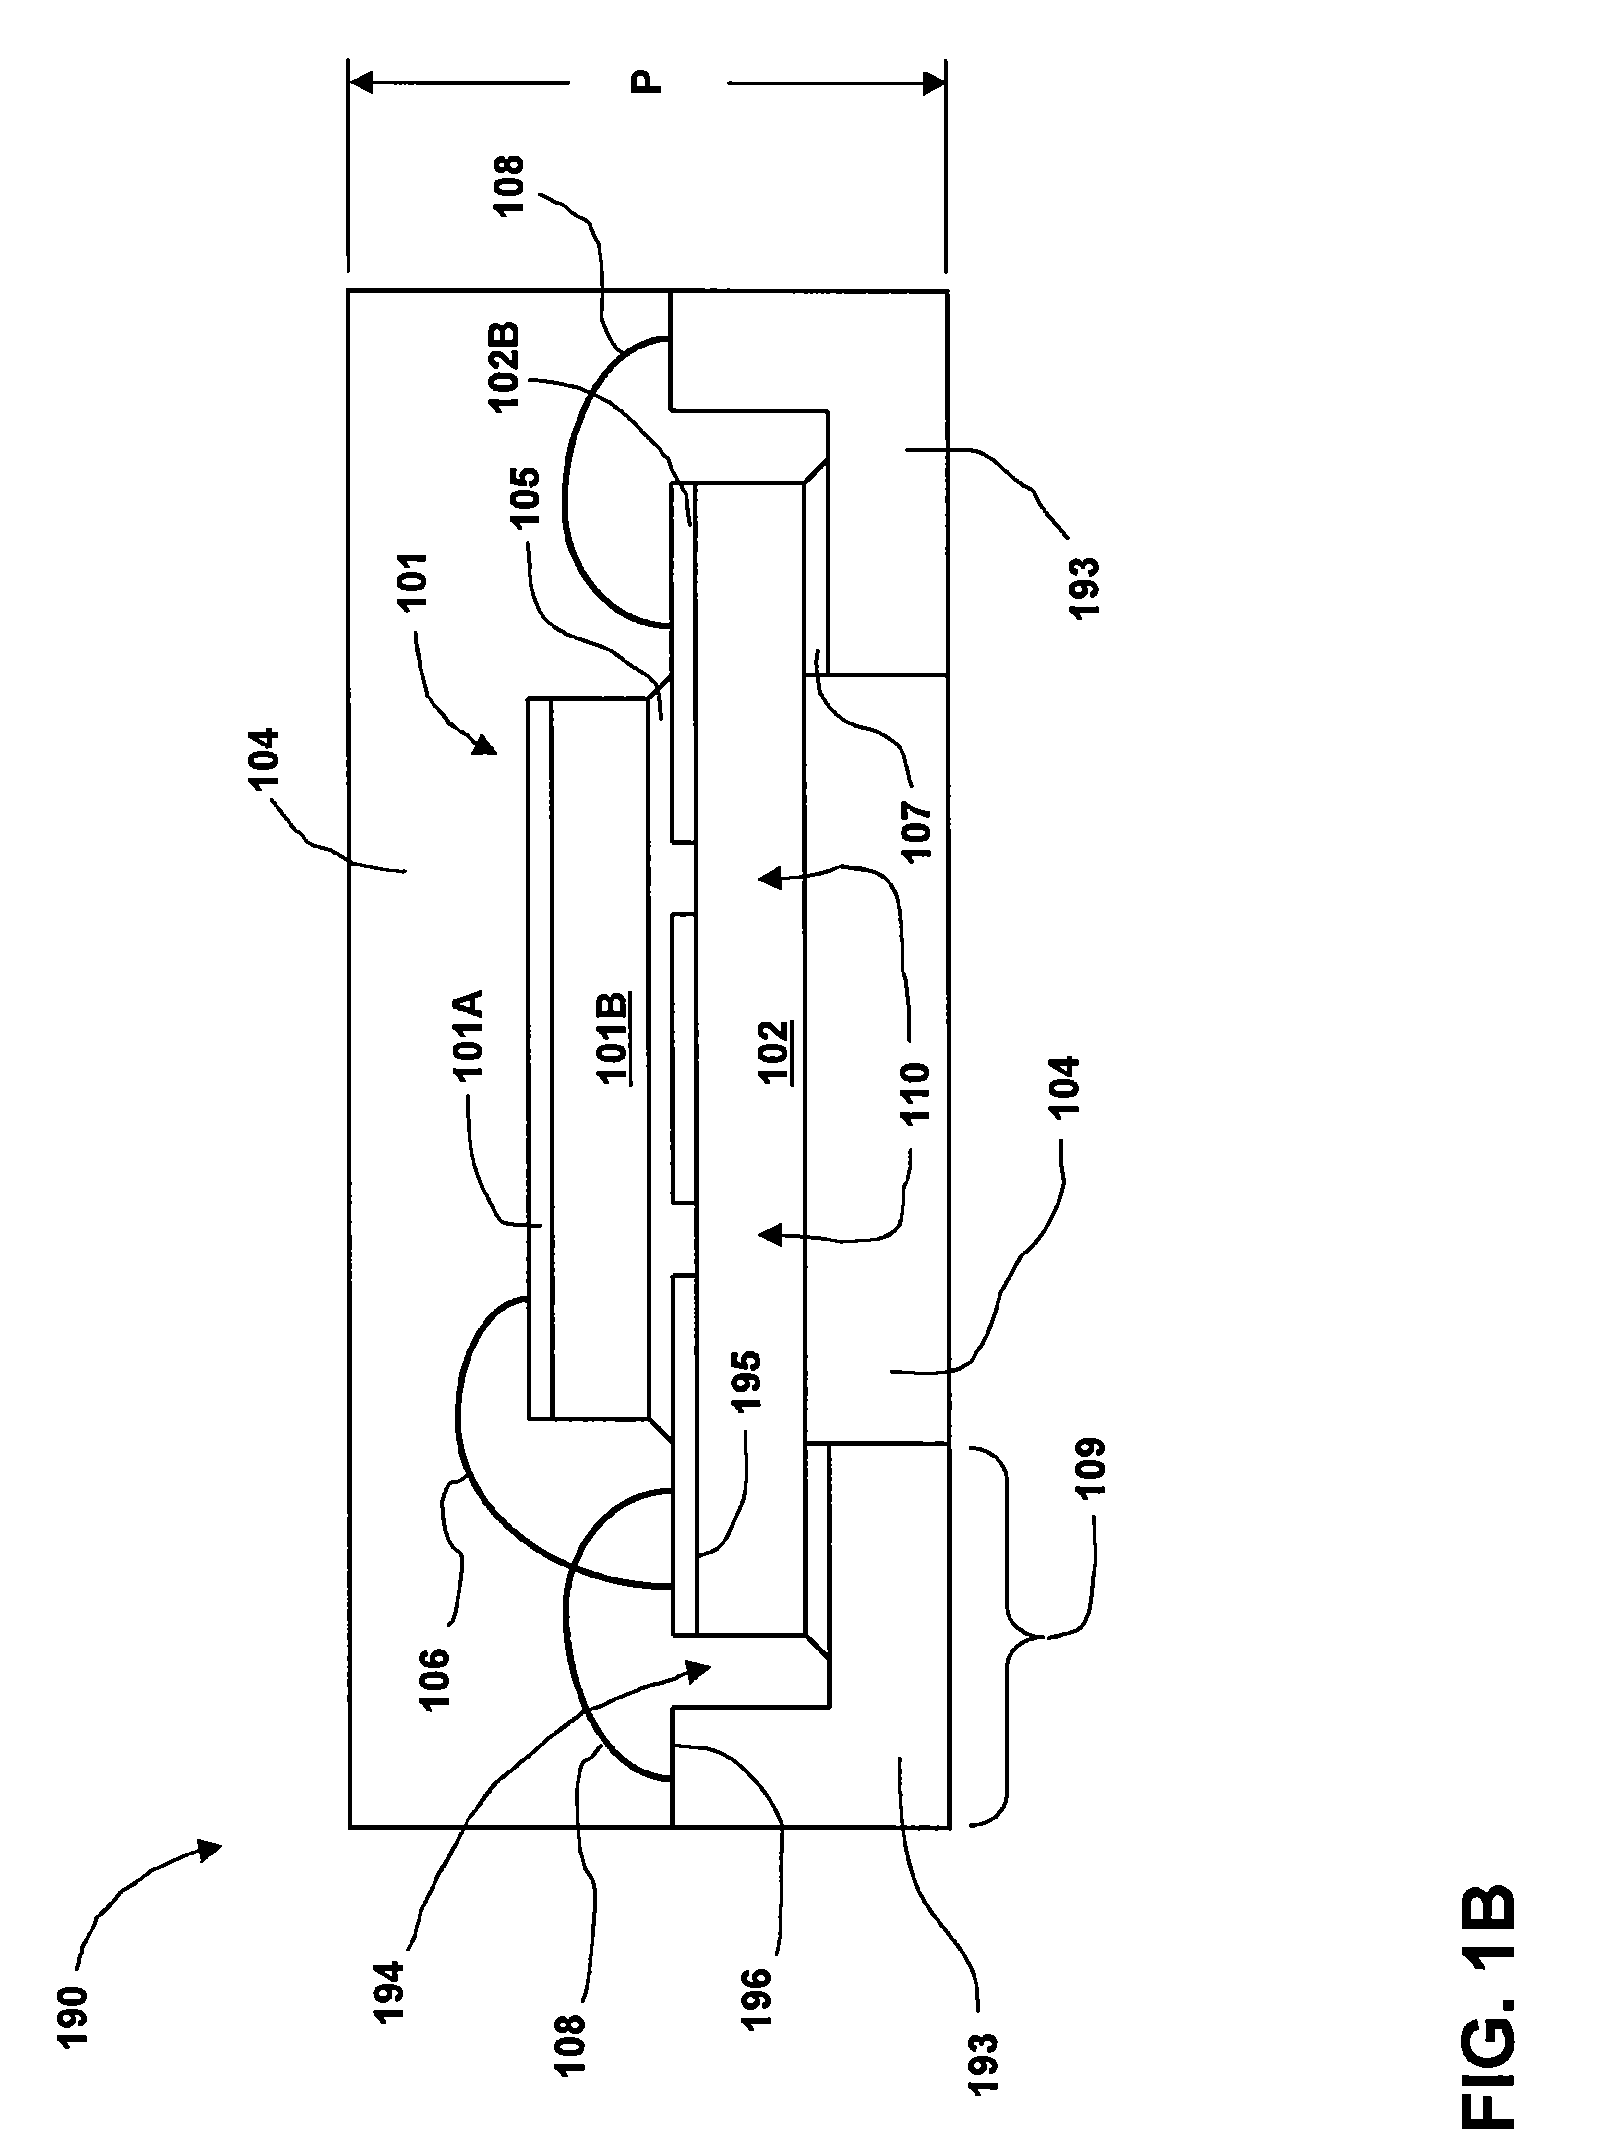 Stacked die package for MEMS resonator system